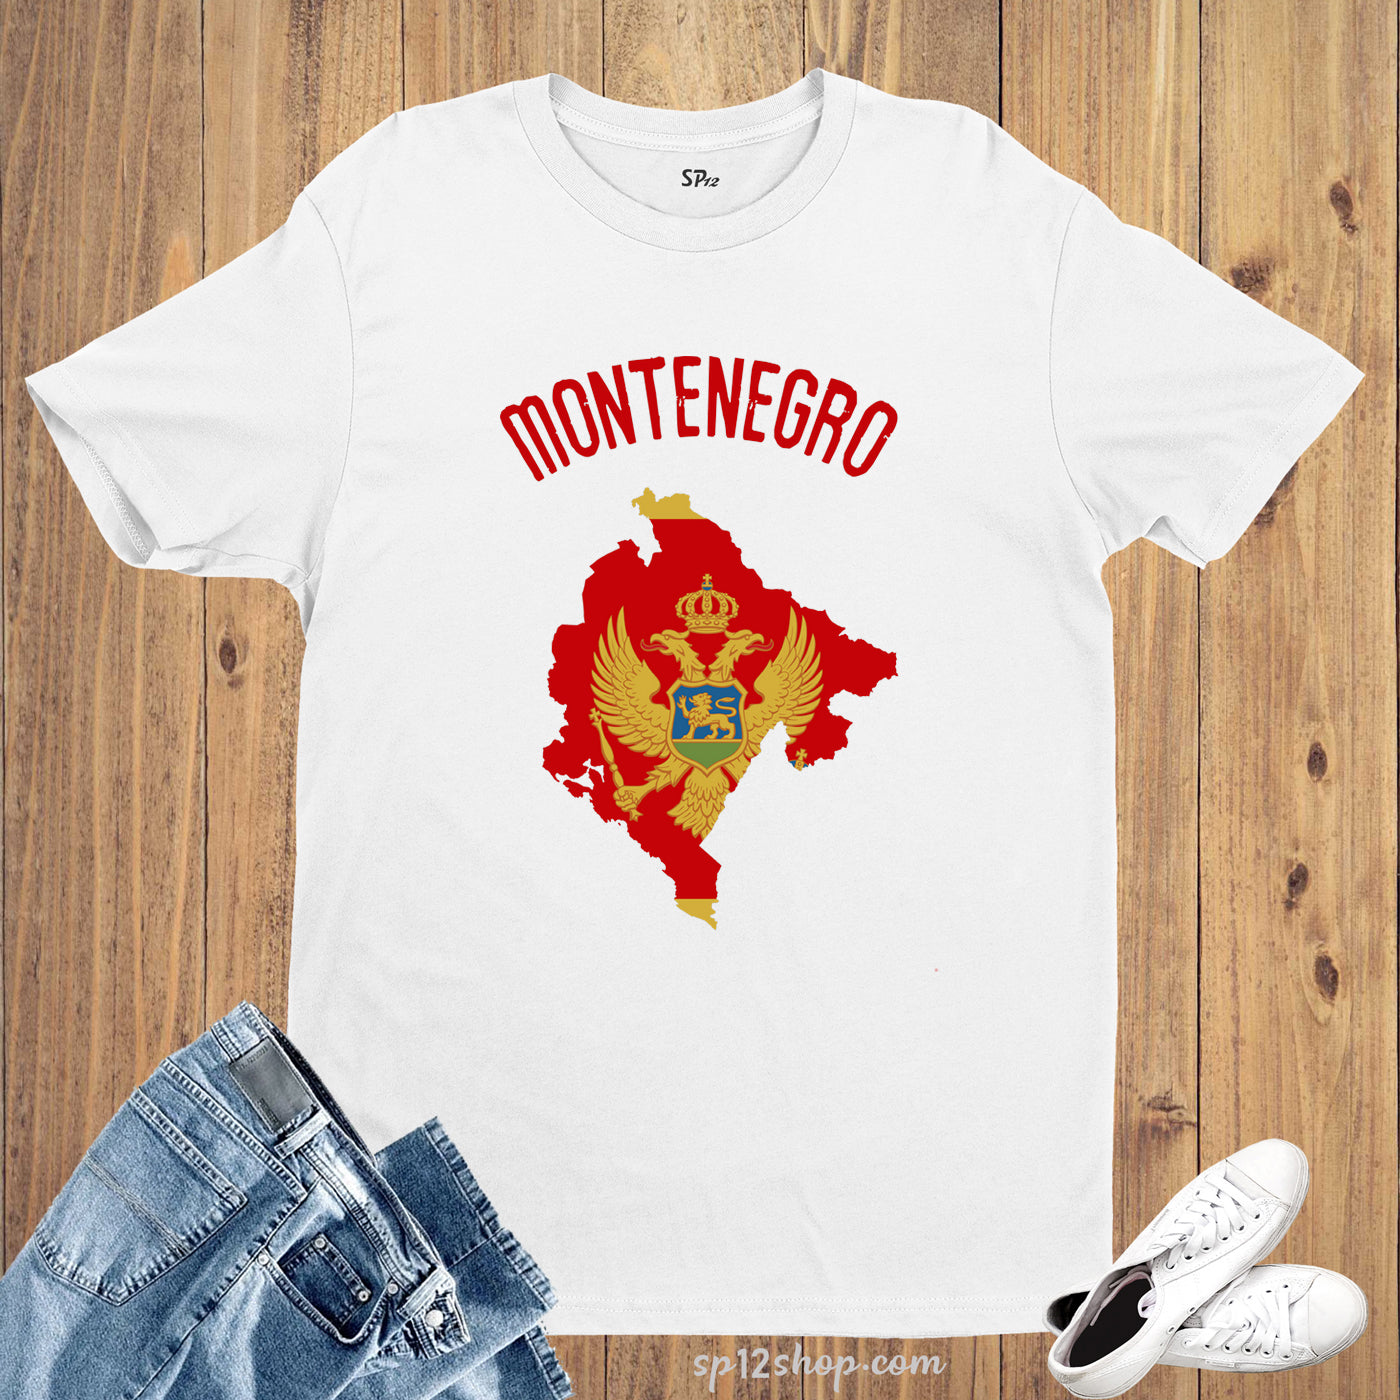 Montenegro Flag T Shirt Olympics FIFA World Cup Country Flag Tee Shirt